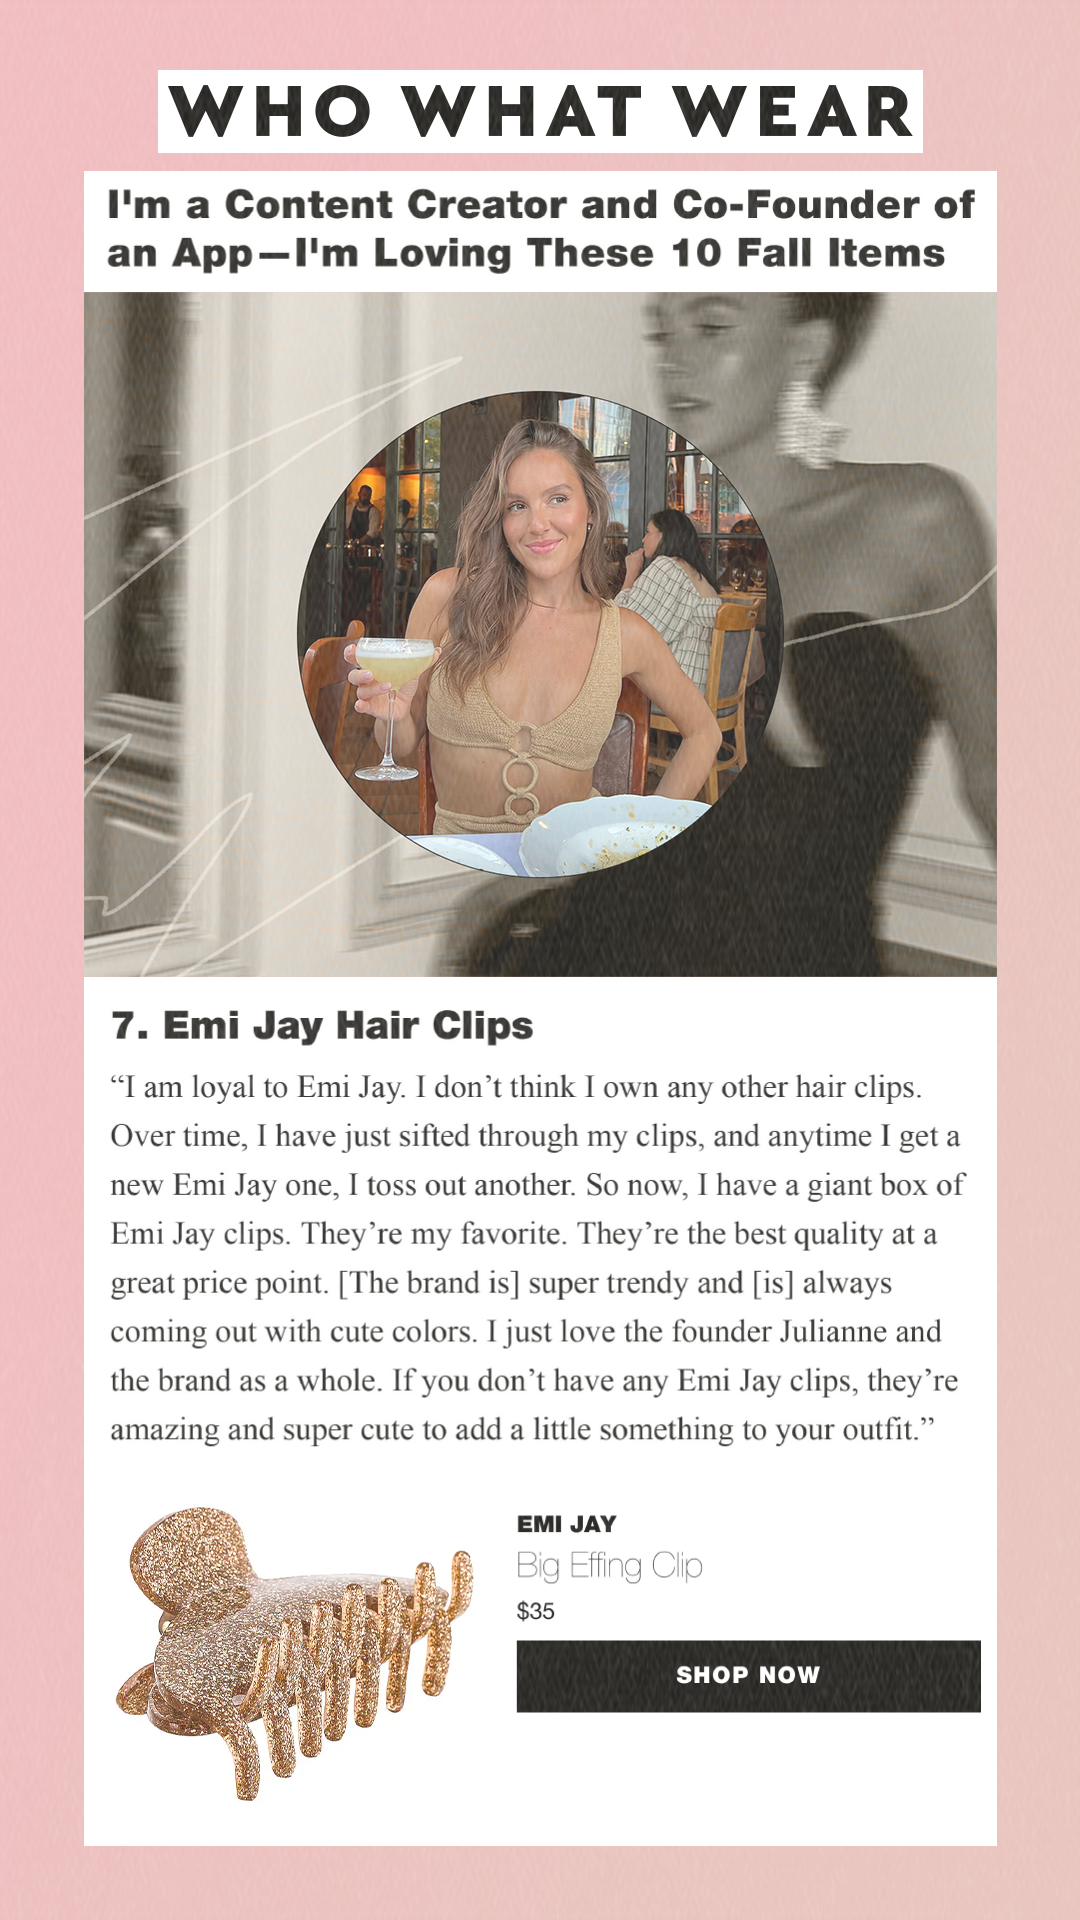 I'm a Content Creator and Co-Founder of an App—I'm Loving These 10 Fall Items 7. Emi Jay Hair Clips Emi Jay Big Effing Clip $35 Shop Now I am loyal to Emi Jay. I don’t think I own any other hair clips. Over time, I have just sifted through my clips, and anytime I get a new Emi Jay one, I toss out another. So now, I have a giant box of Emi Jay clips. They’re my favorite. They’re the best quality at a great price point. [The brand is] super trendy and [is] always coming out with cute colors. I just love the founder Julianne and the brand as a whole. If you don’t have any Emi Jay clips, they’re amazing and super cute to add a little something to your outfit.